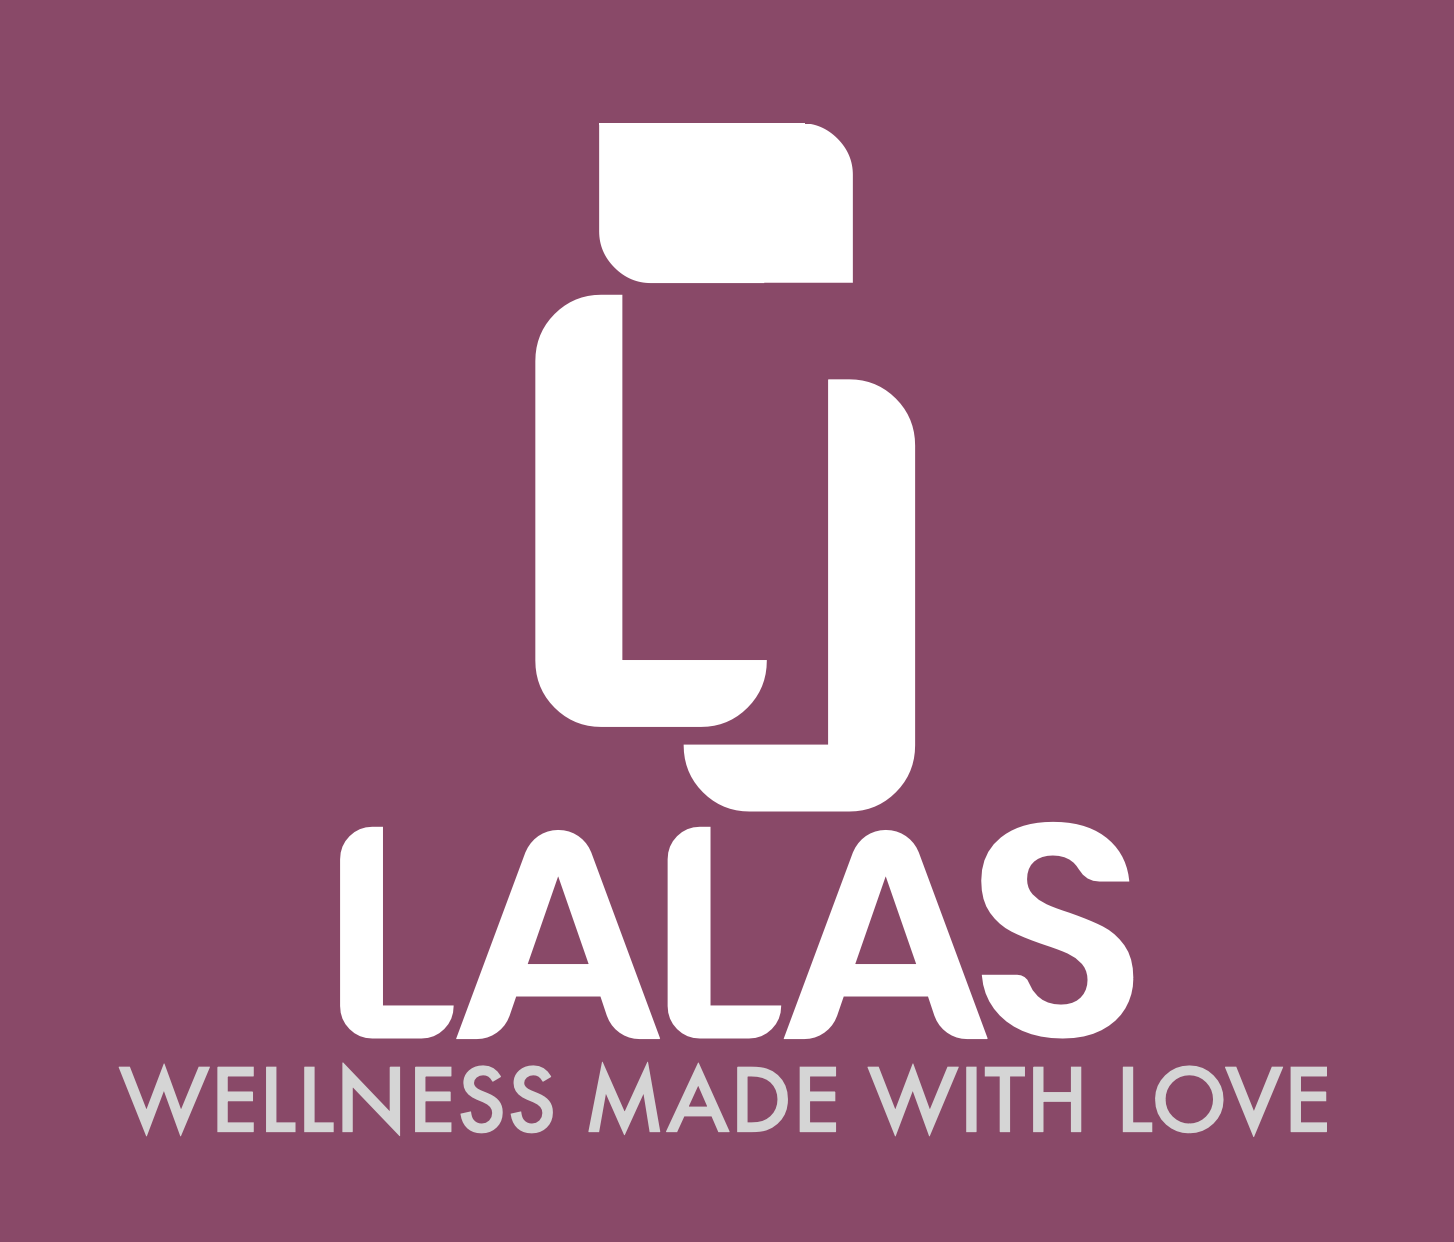 Lala's Wellnes Self'ish' Health - Simplify and Optimize your Self-Care